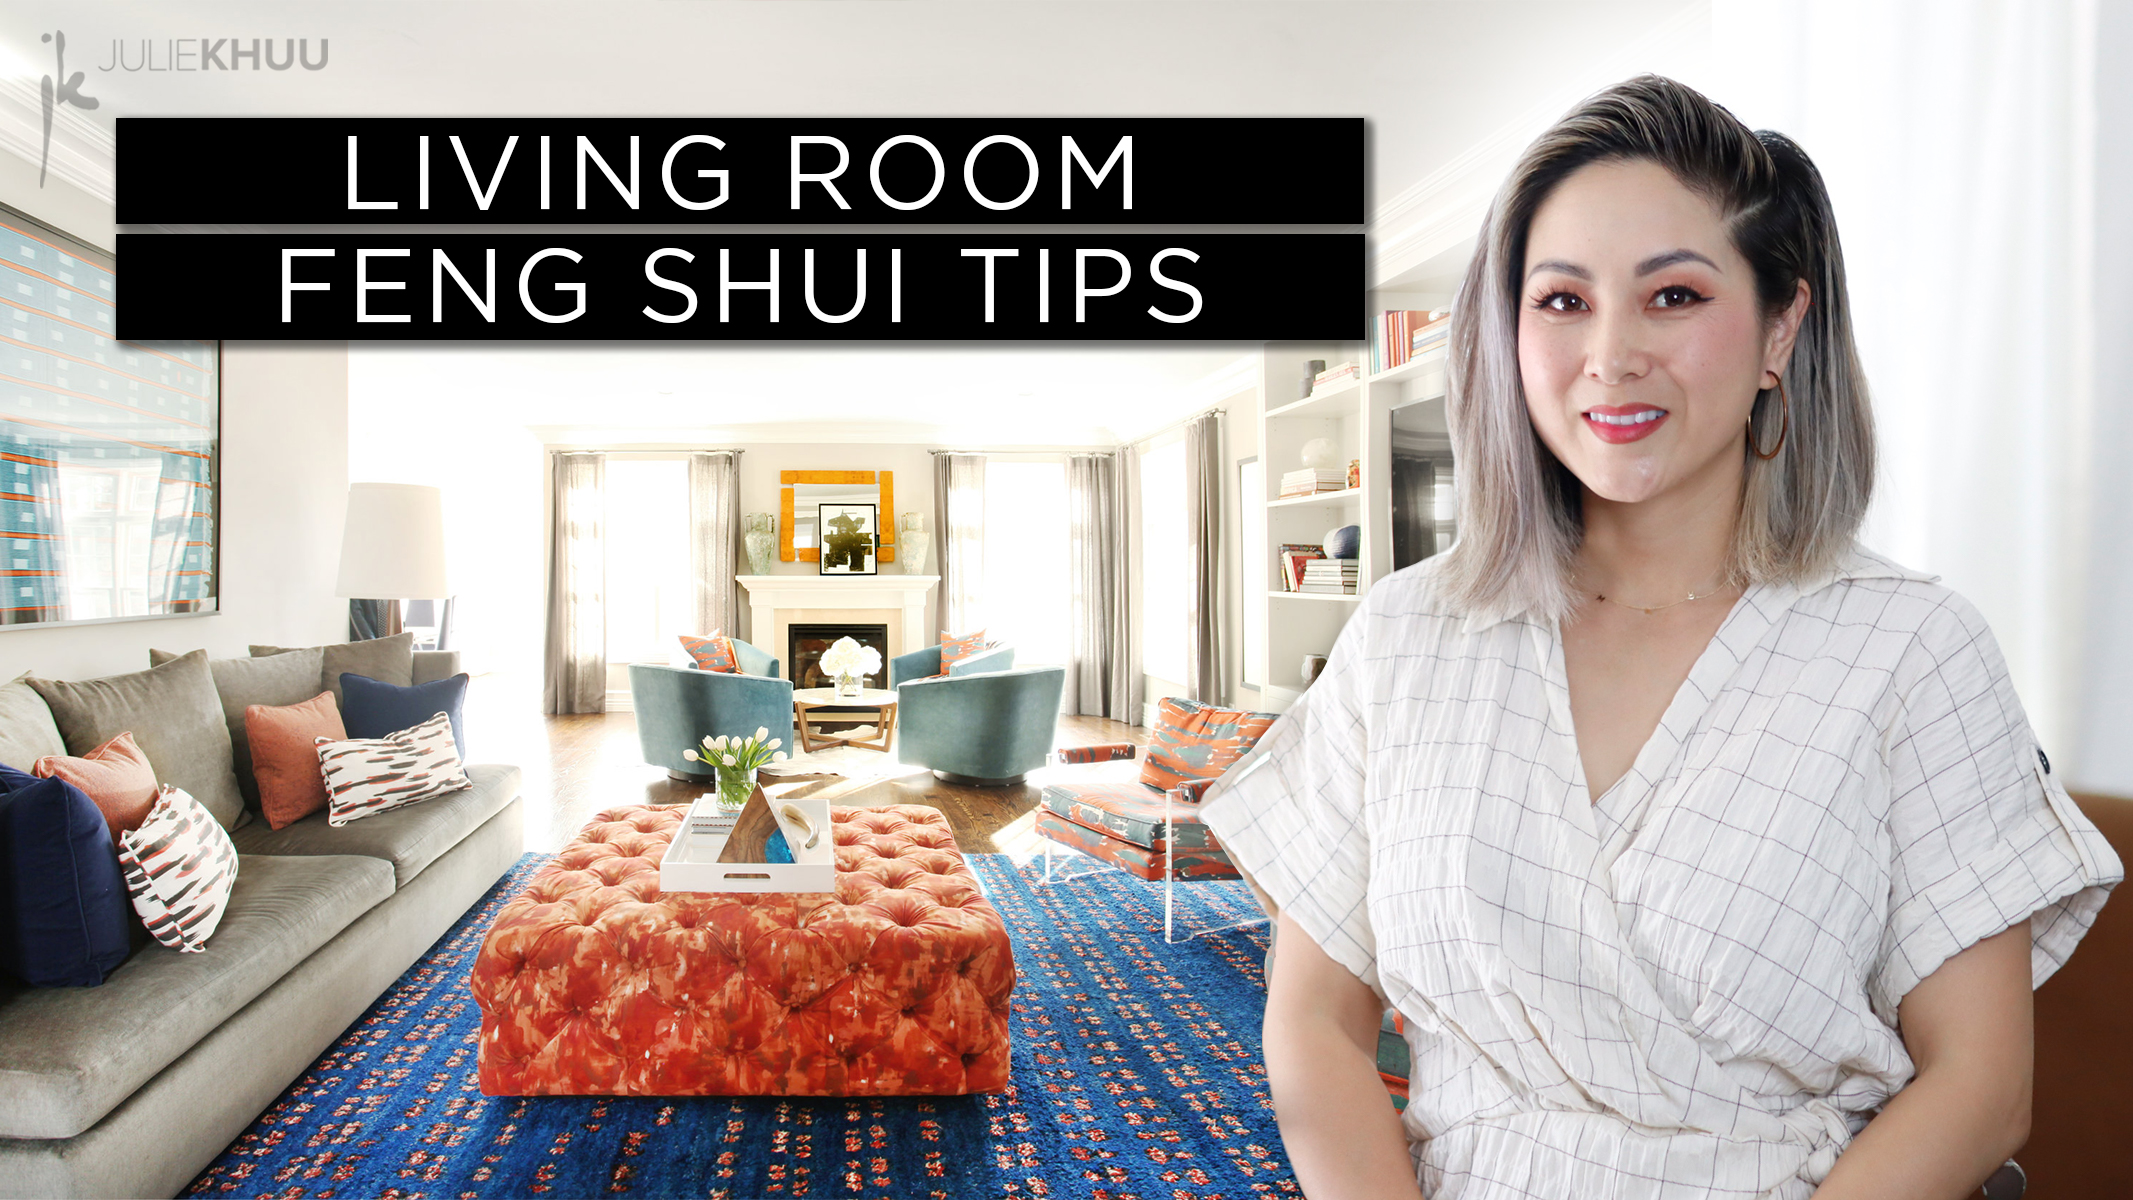 Feng Shui Decorating  Feng Shui Interior Design For The Home